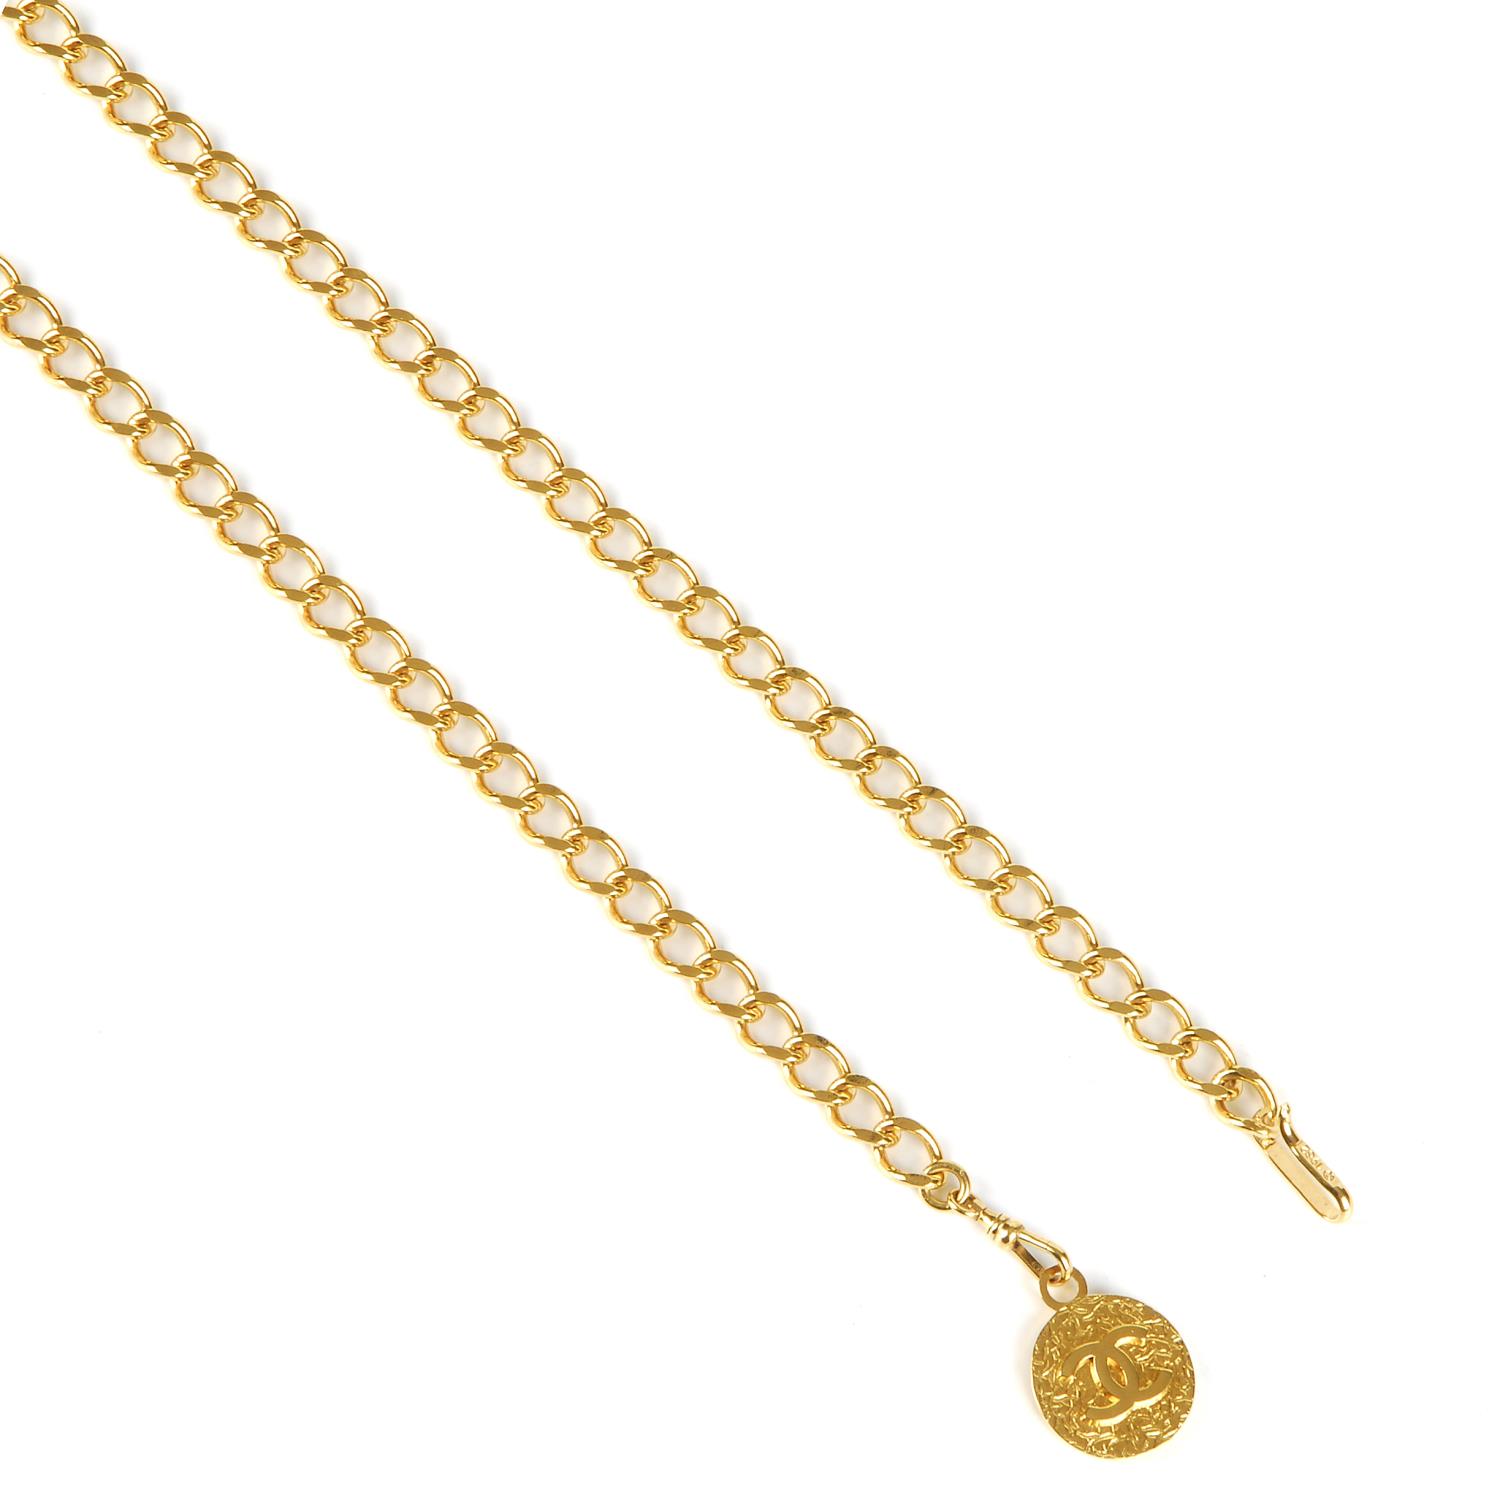 CHANEL - a chain belt. Featuring a gold-tone chain with a large logo CC medallion hanging at one end